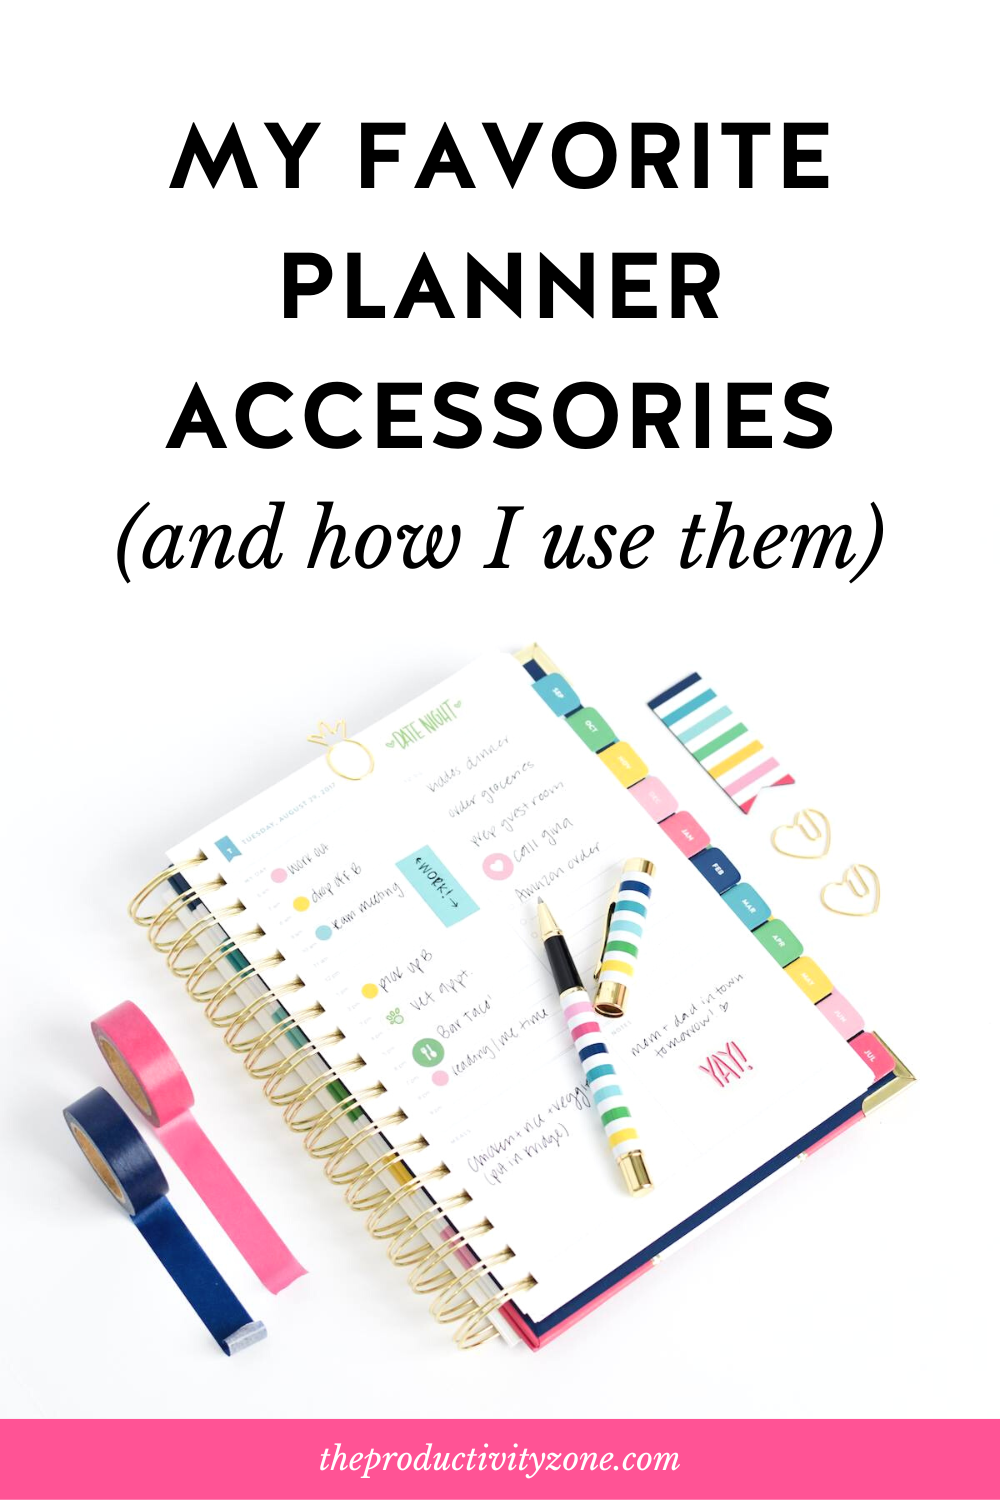 Simplified Planner folded over to show off a daily page using colorful planner accessories